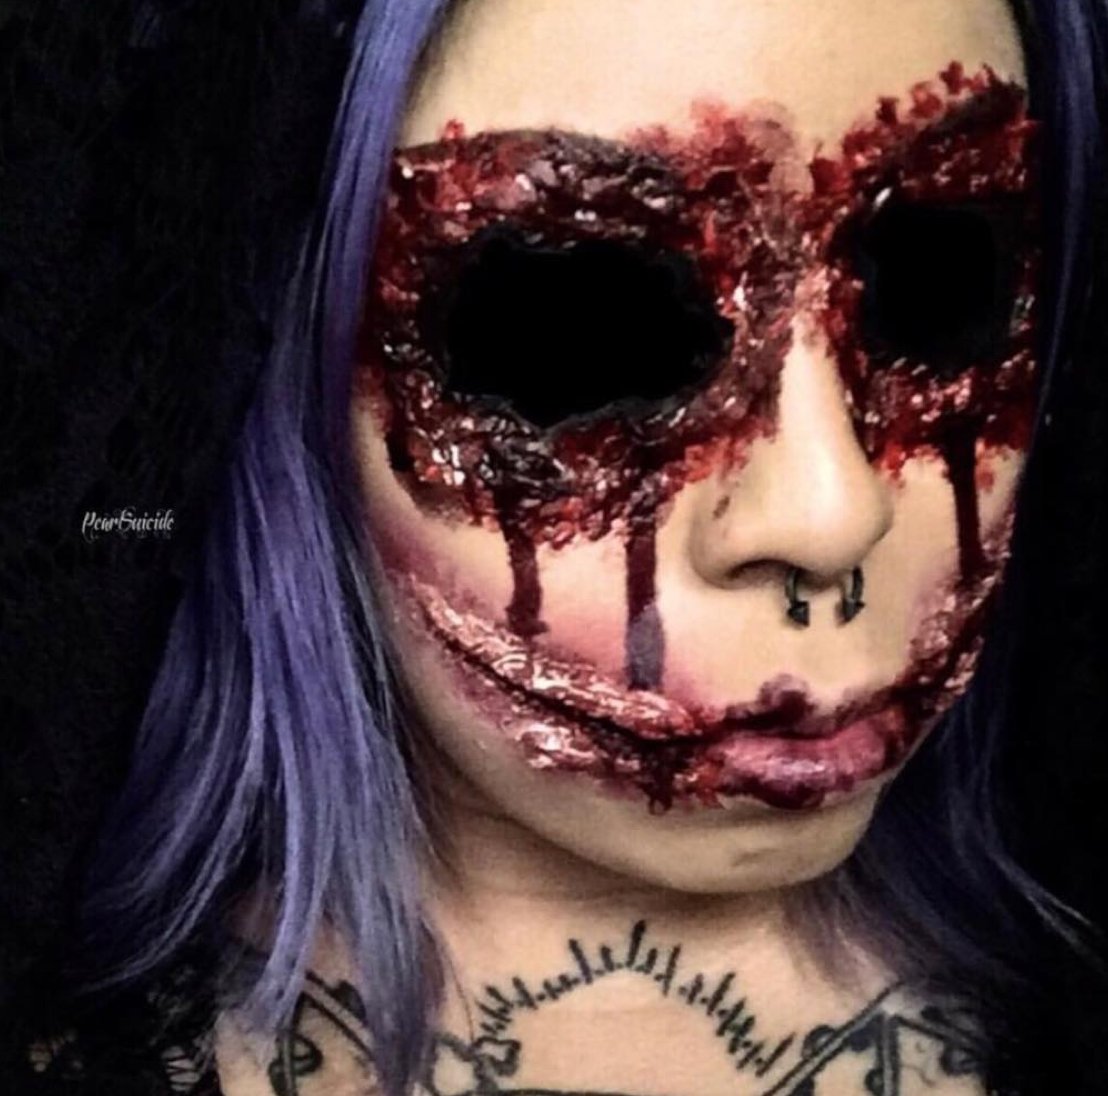 Glam & Gore 🔥🔥 #FrendsBeauty @pearlsuicide Showing Off All The Gore This Morning Using Product From @frendsbeauty 🙌🏻